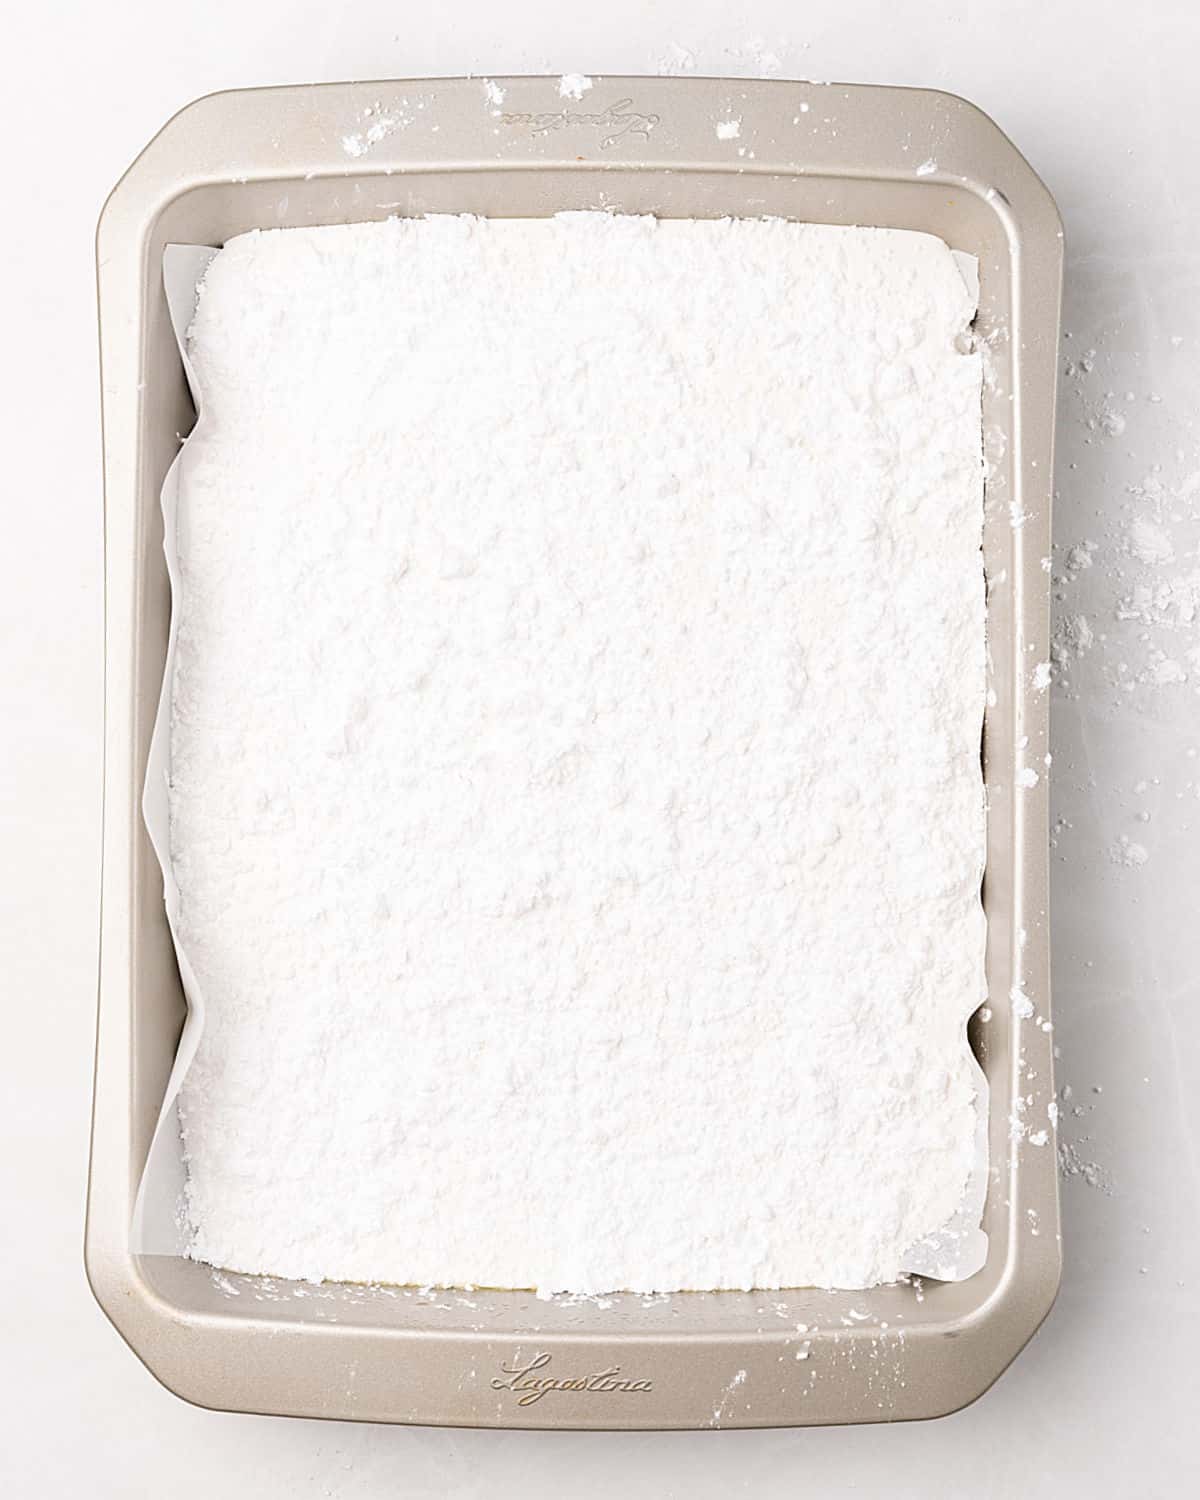 Powdered sugar coated marshmallow mixture in a parchment-lined baking pan on a white surface.